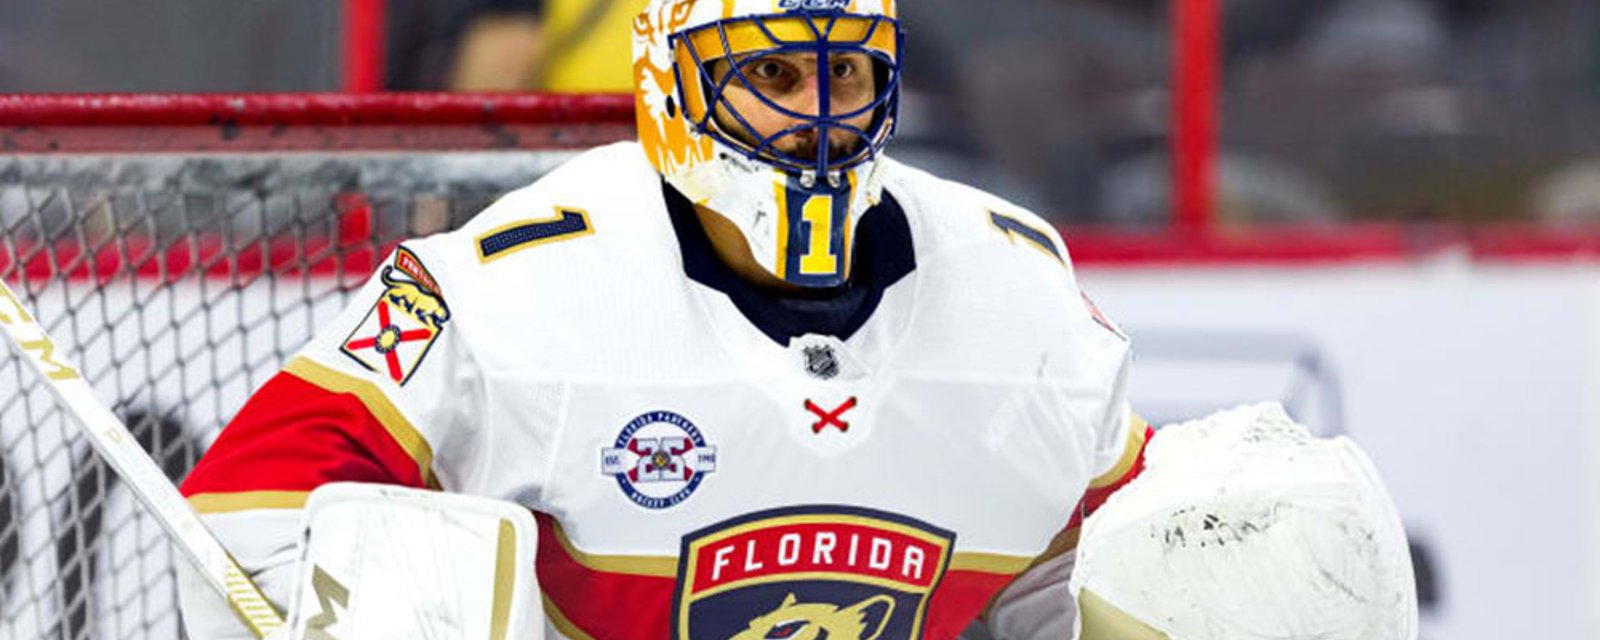 Luongo makes history as first Panther to have his jersey number retired